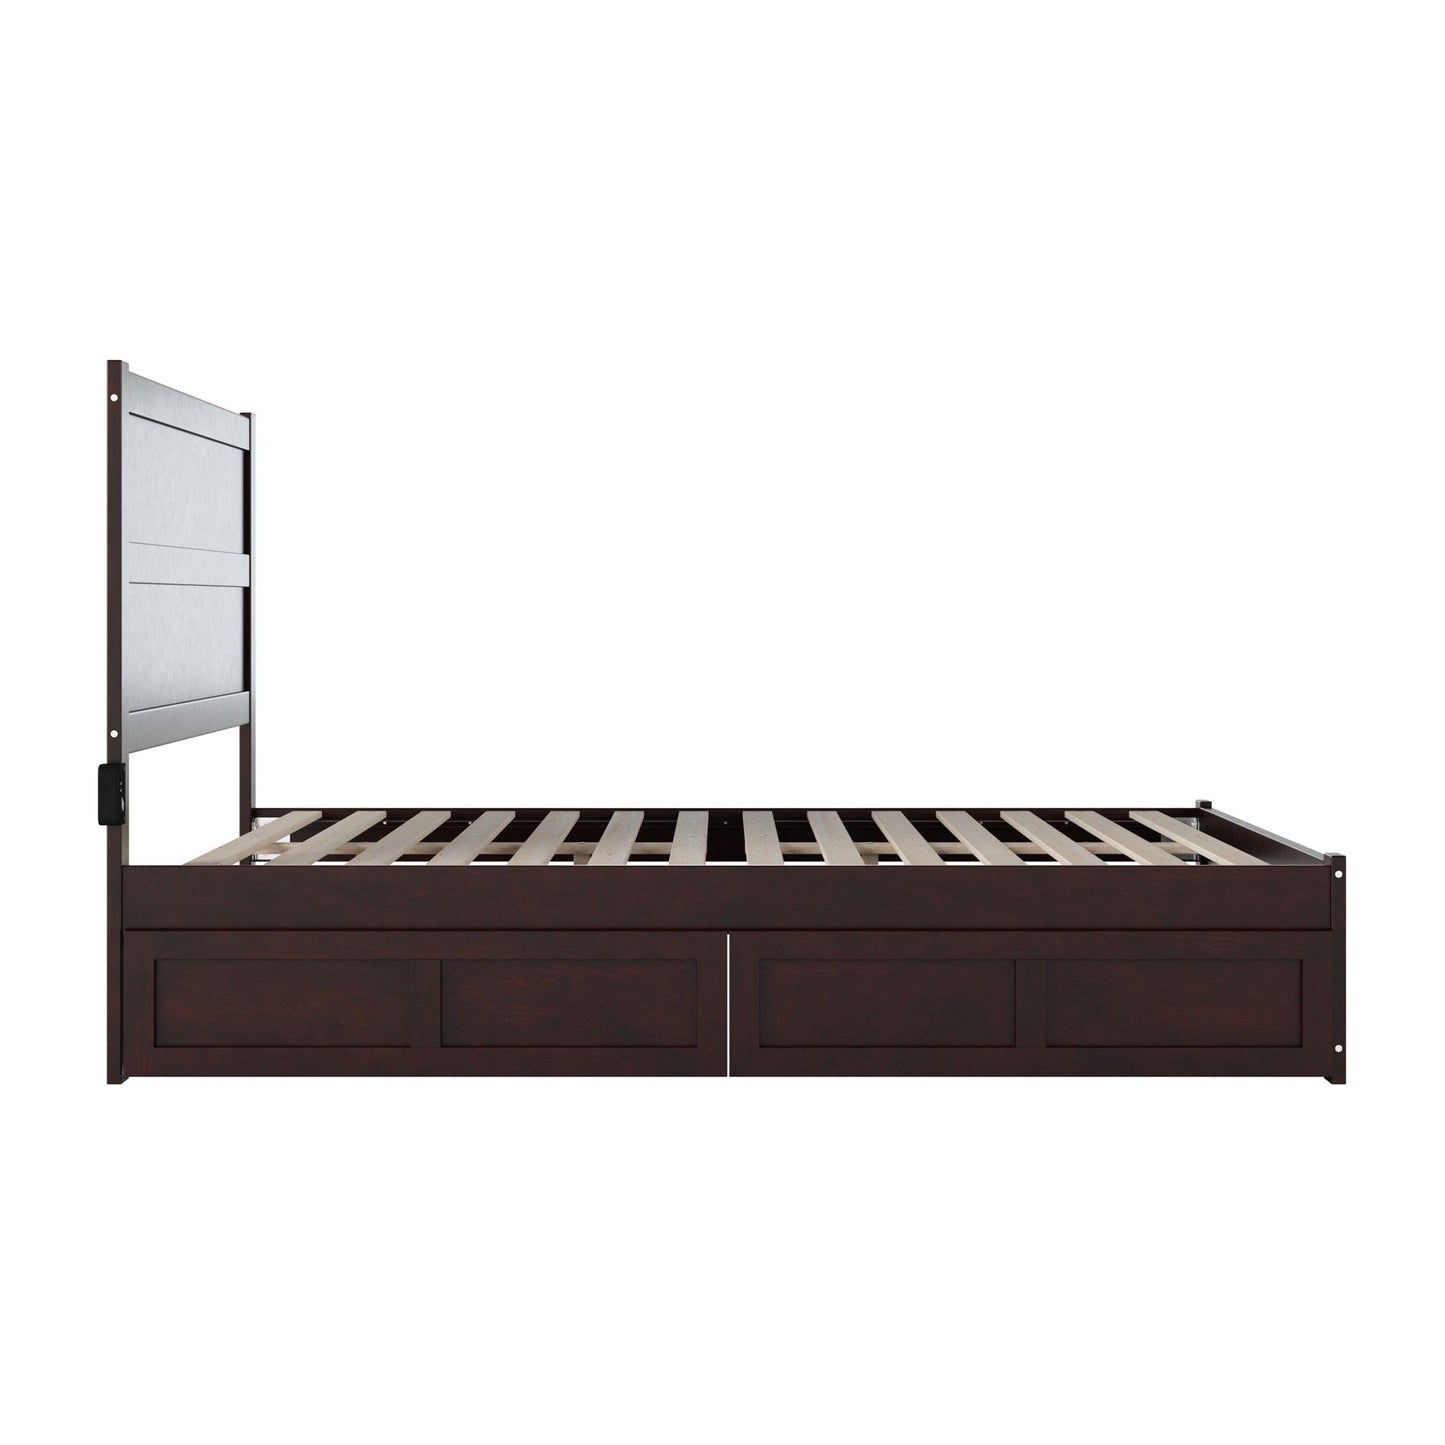 AFI Furnishings NoHo Queen Bed with Footboard and 2 Drawers in Espresso AG9163441